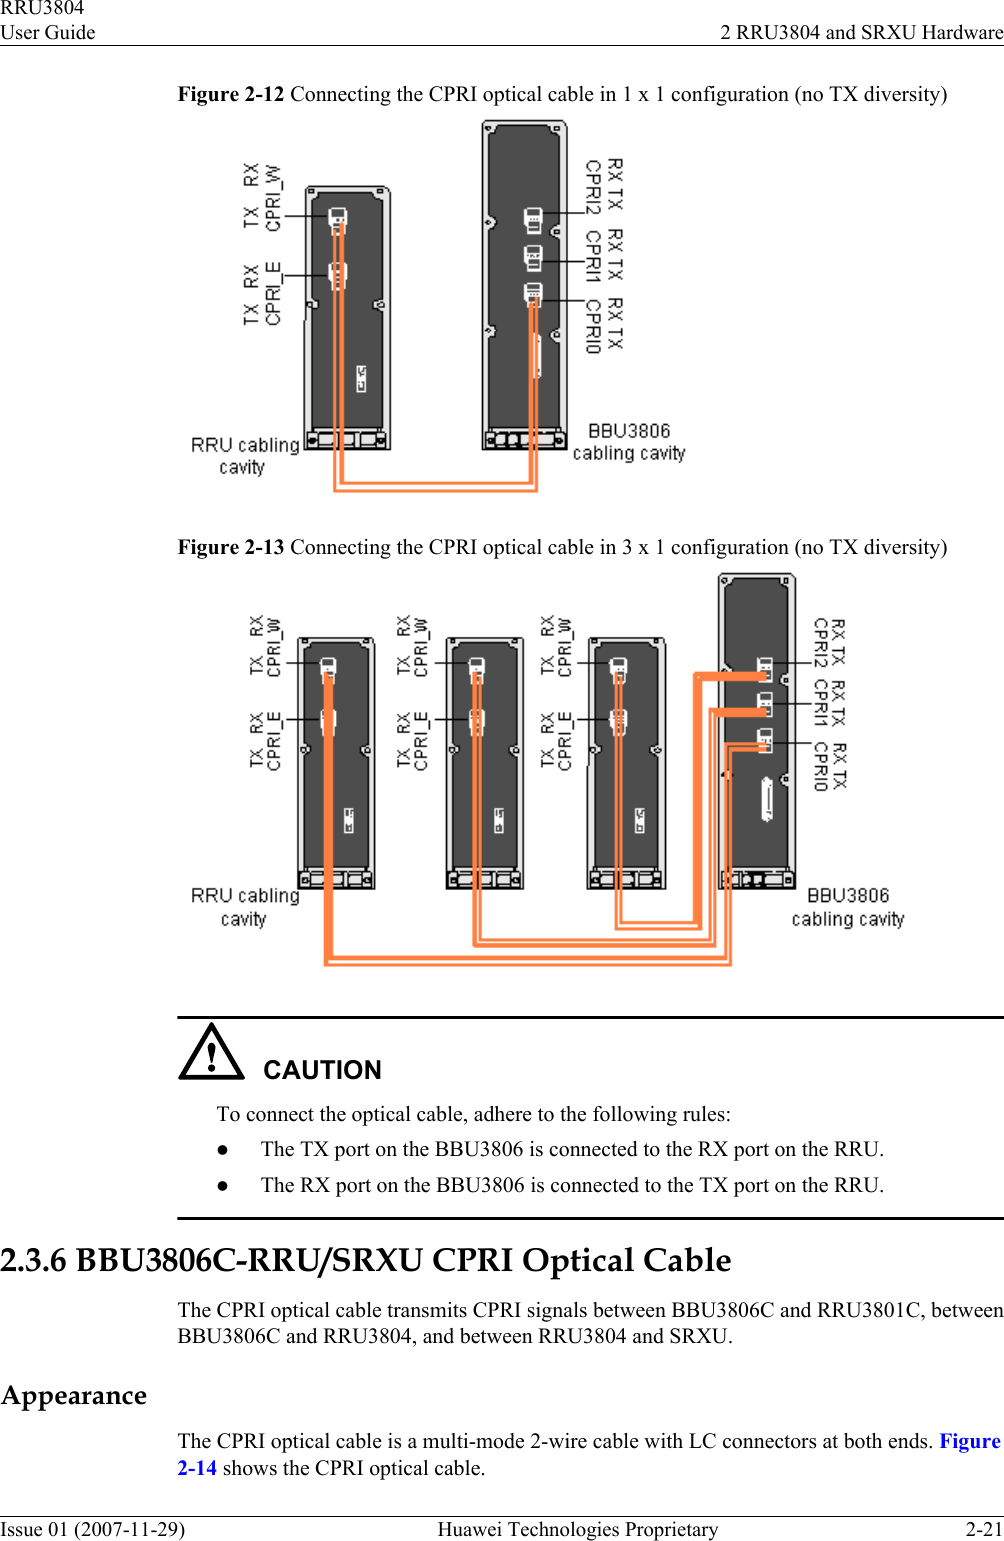 Figure 2-12 Connecting the CPRI optical cable in 1 x 1 configuration (no TX diversity)Figure 2-13 Connecting the CPRI optical cable in 3 x 1 configuration (no TX diversity)CAUTIONTo connect the optical cable, adhere to the following rules:lThe TX port on the BBU3806 is connected to the RX port on the RRU.lThe RX port on the BBU3806 is connected to the TX port on the RRU.2.3.6 BBU3806C-RRU/SRXU CPRI Optical CableThe CPRI optical cable transmits CPRI signals between BBU3806C and RRU3801C, betweenBBU3806C and RRU3804, and between RRU3804 and SRXU.AppearanceThe CPRI optical cable is a multi-mode 2-wire cable with LC connectors at both ends. Figure2-14 shows the CPRI optical cable.RRU3804User Guide 2 RRU3804 and SRXU HardwareIssue 01 (2007-11-29)  Huawei Technologies Proprietary 2-21